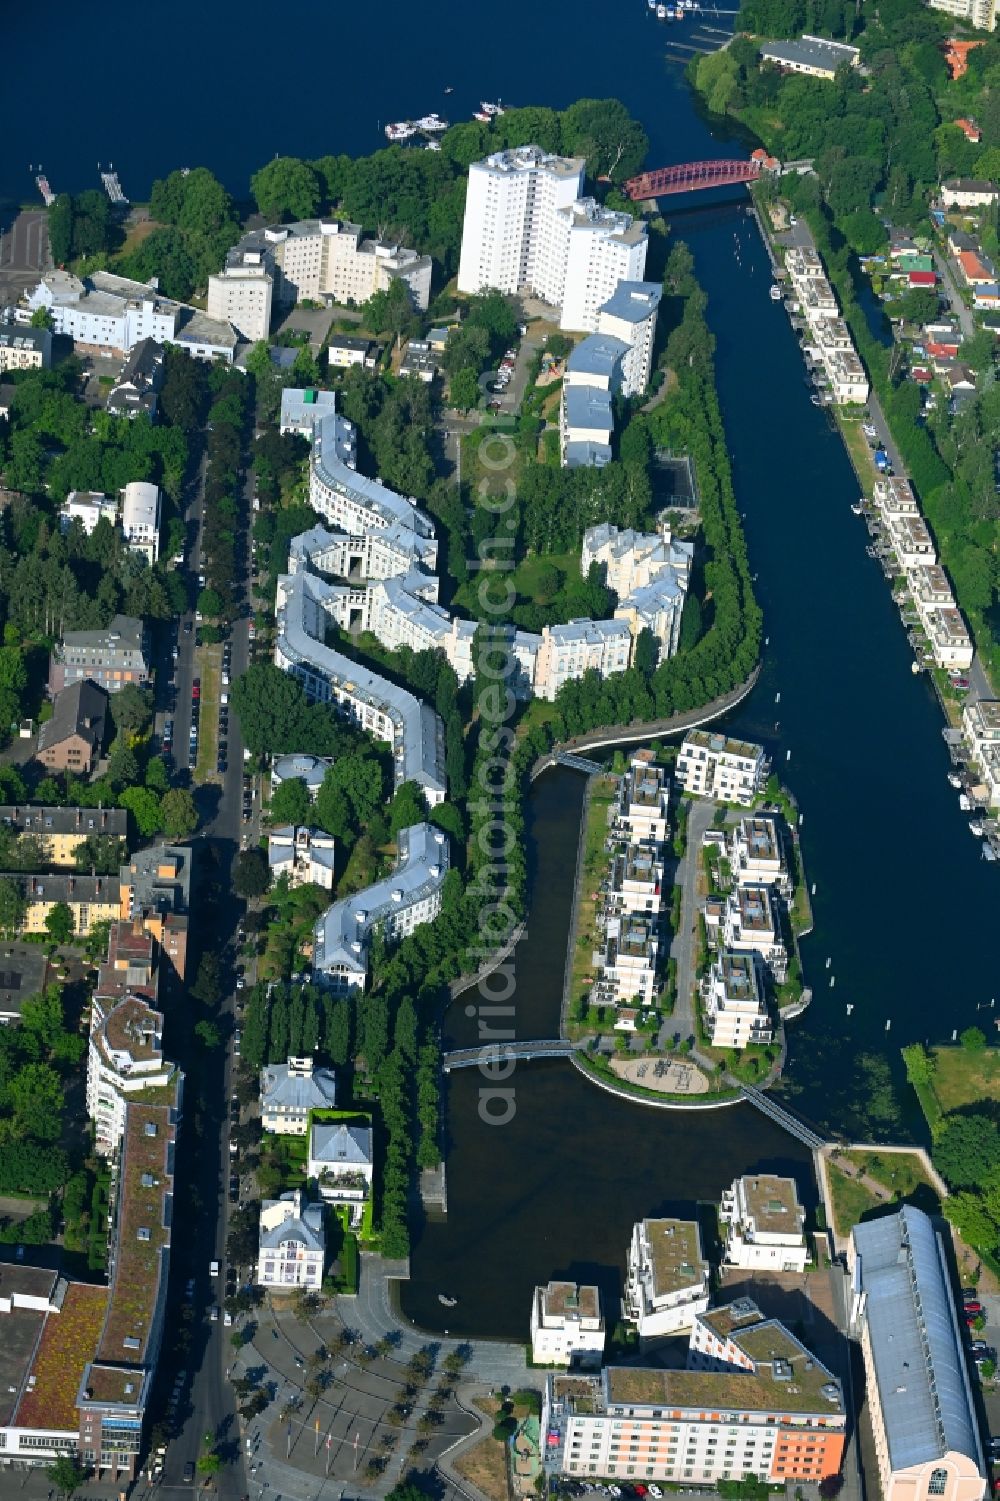 Berlin from above - Residential area of the multi-family house settlement auf of Tegeler Insel on Tegeler Hafen in Front of the island Humboldt-Insel in the district Reinickendorf in Berlin, Germany